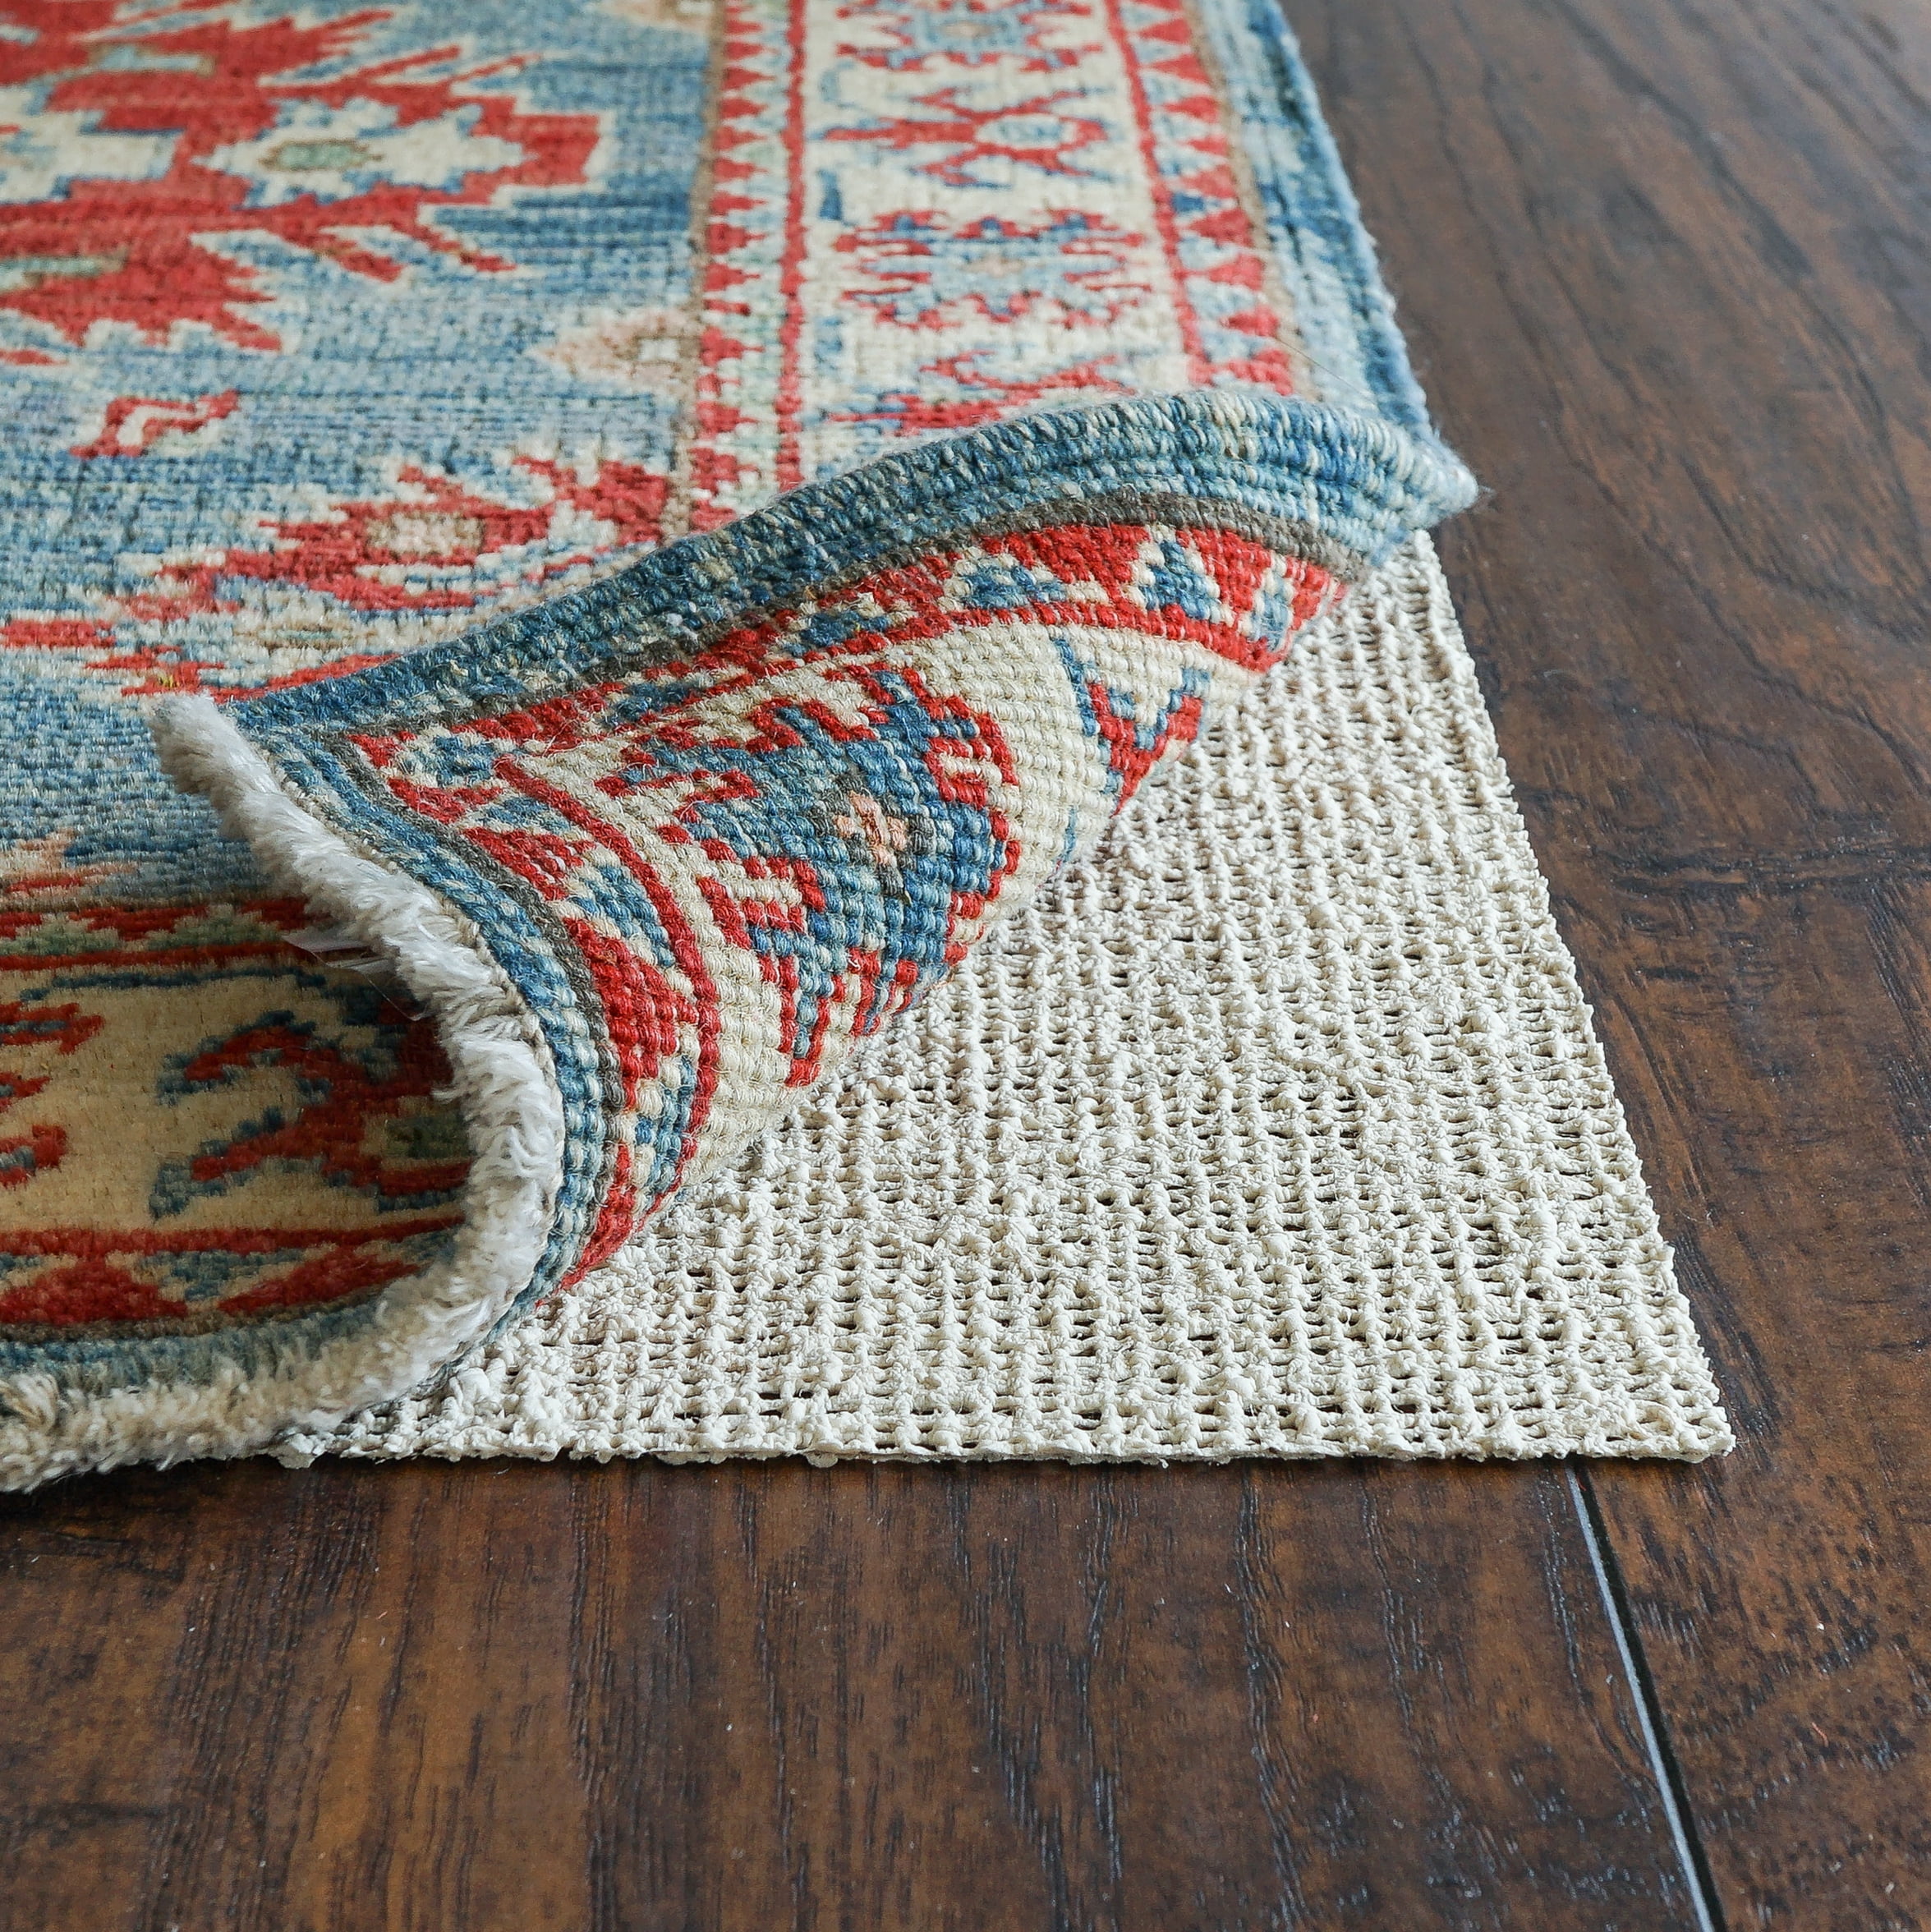 RUGPADUSA - Nature's Grip - 3'x10' - 1/16 Thick - Rubber and Jute -  Eco-Friendly Non-Slip Rug Pad - Safe for your Floors and your Family, Many  Custom Sizes 